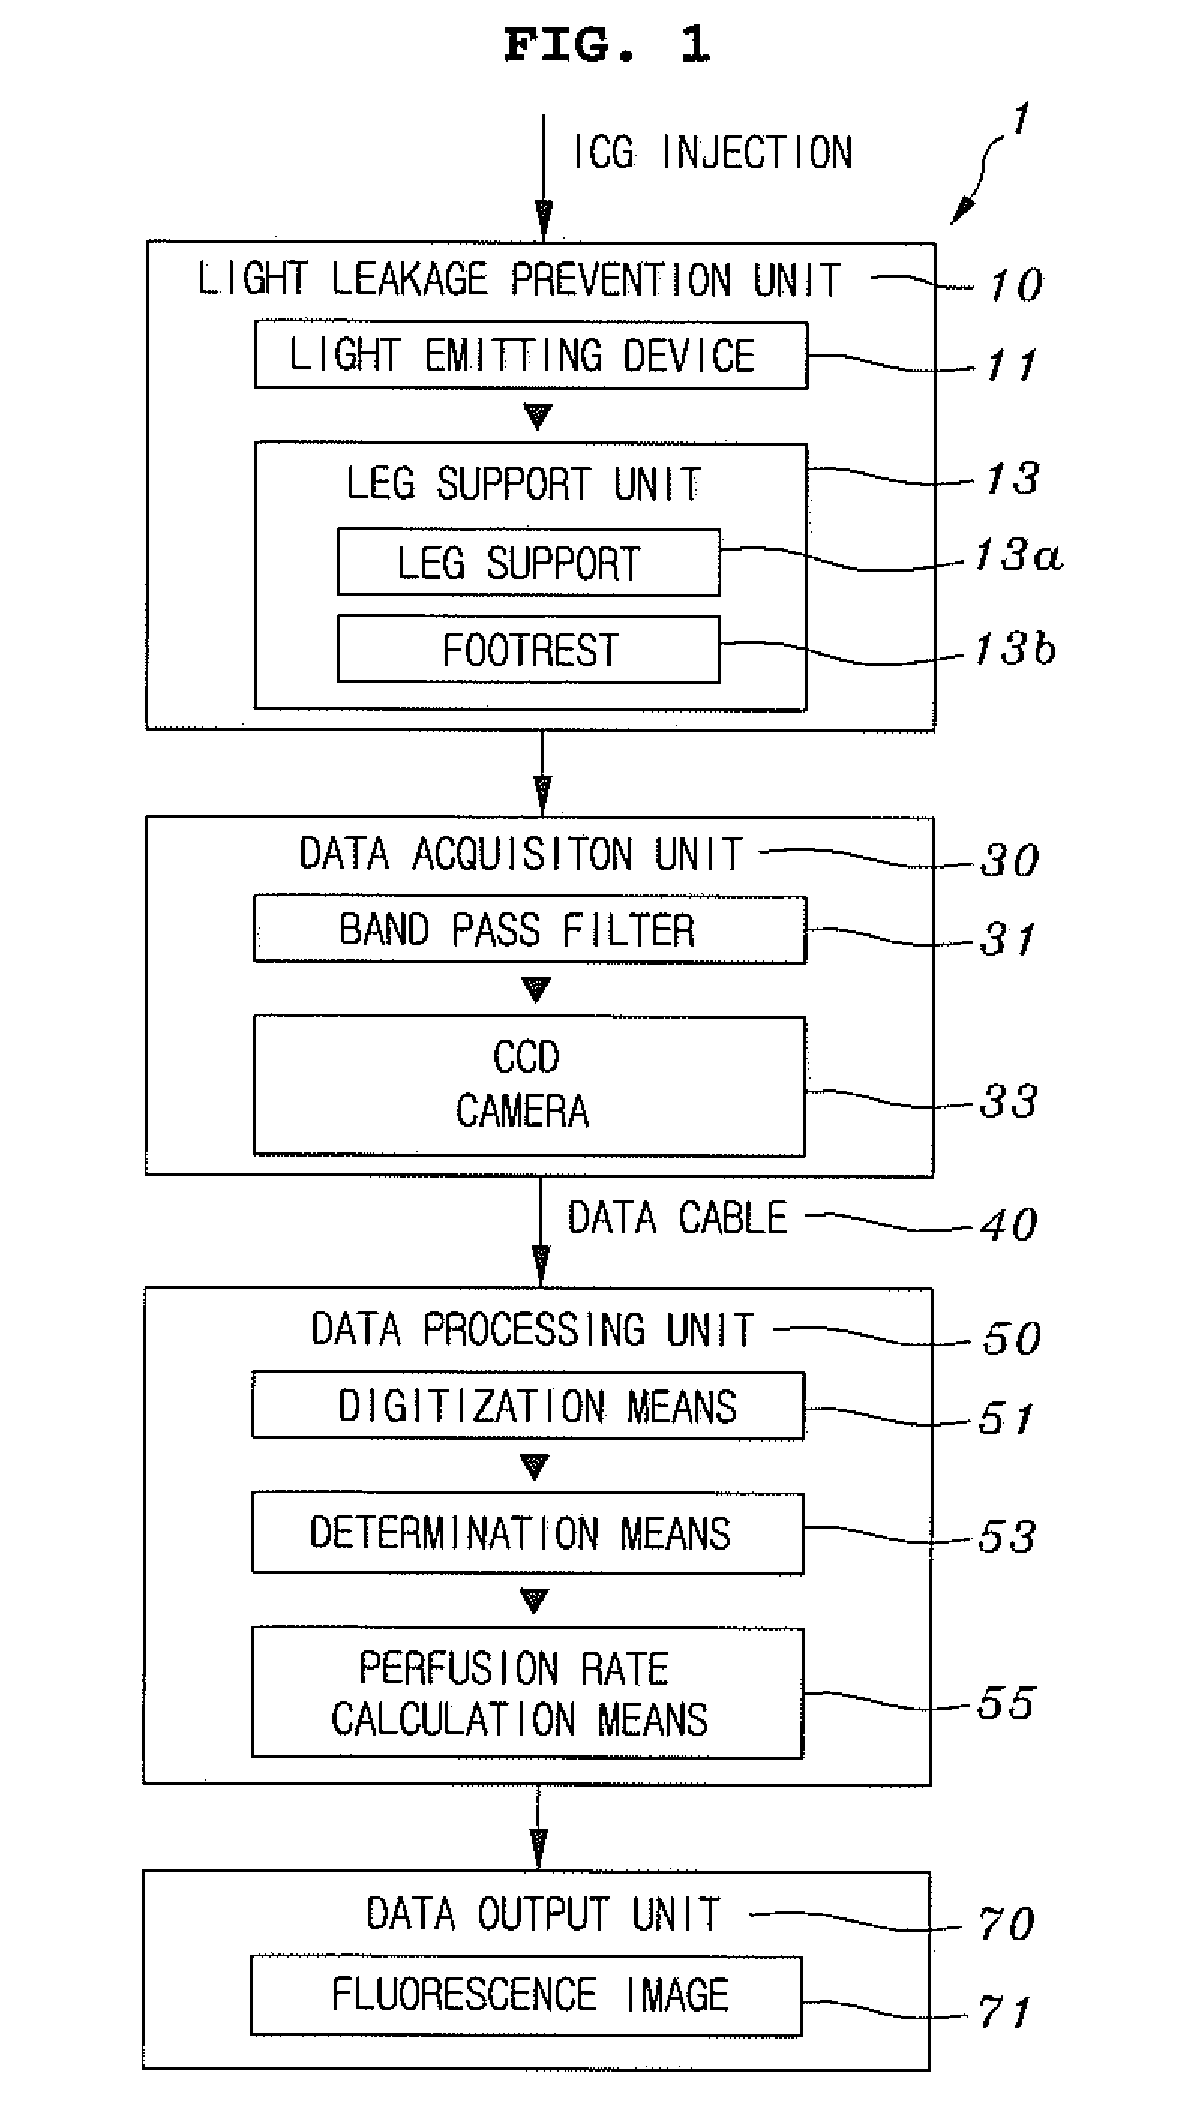 Apparatus for measuring perfusion rate of legs